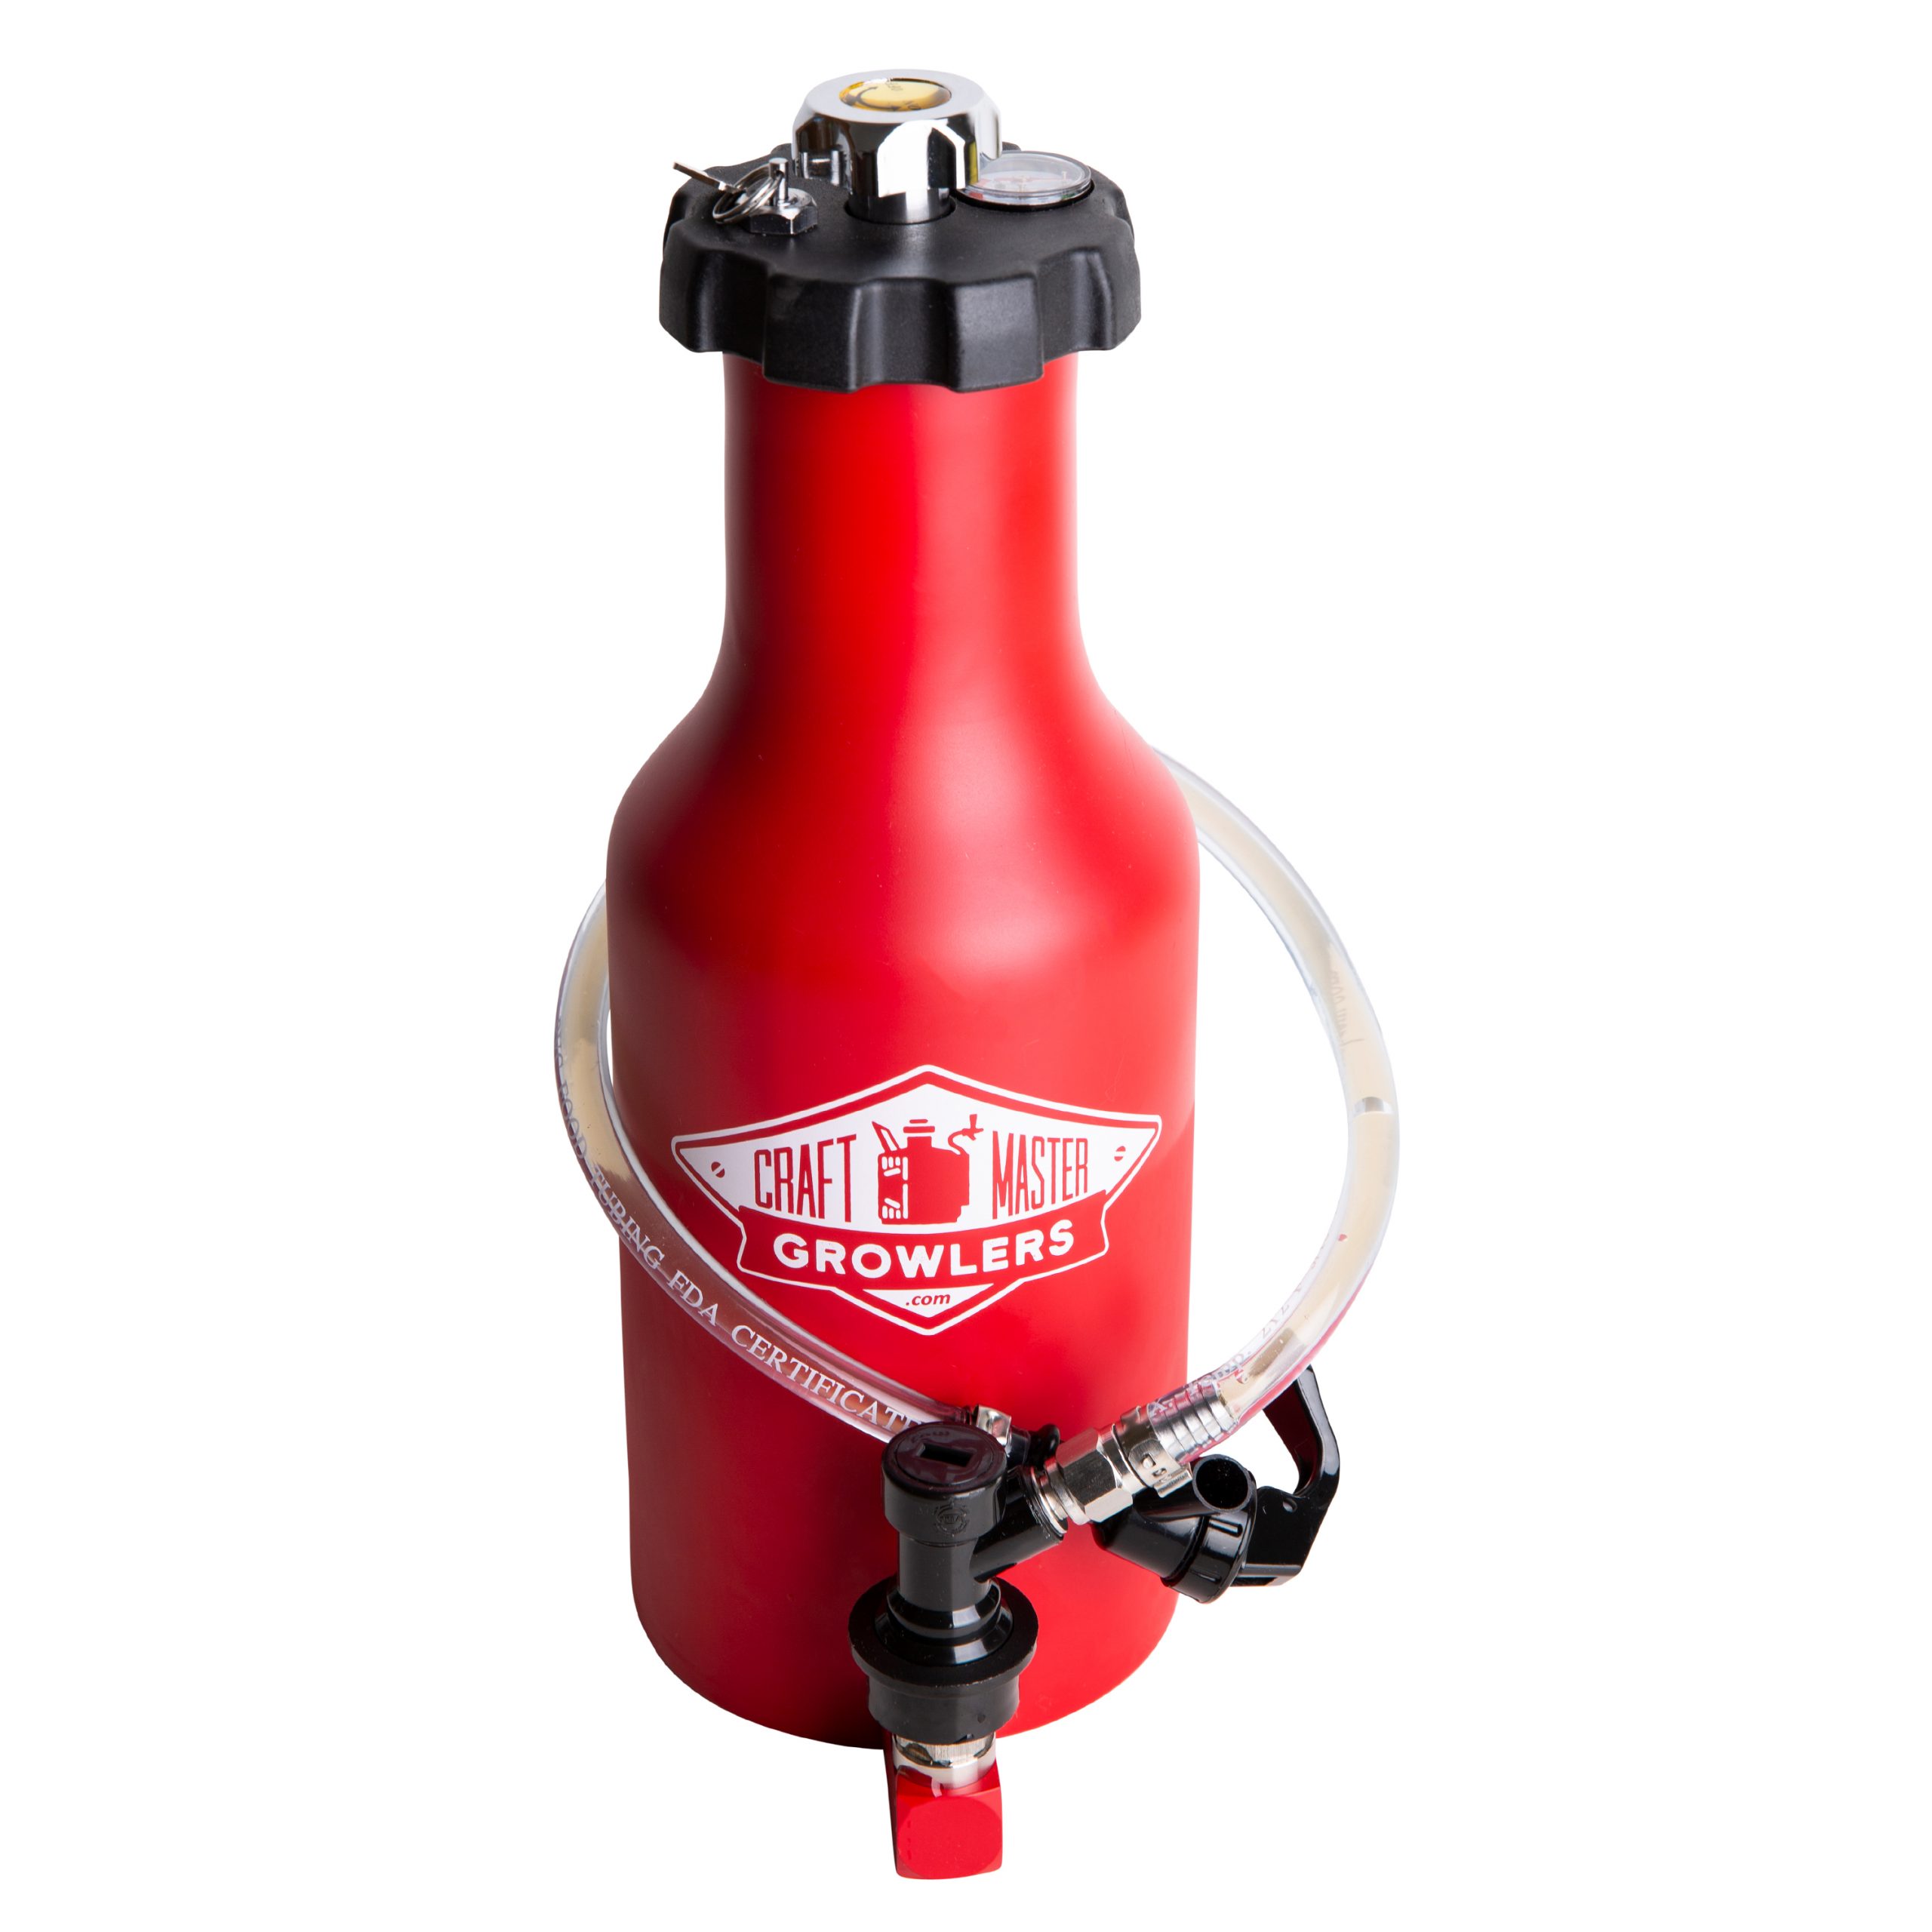 https://www.craftmastergrowlers.com/wp-content/uploads/2020/04/red-round-hose-filled-scaled.jpg